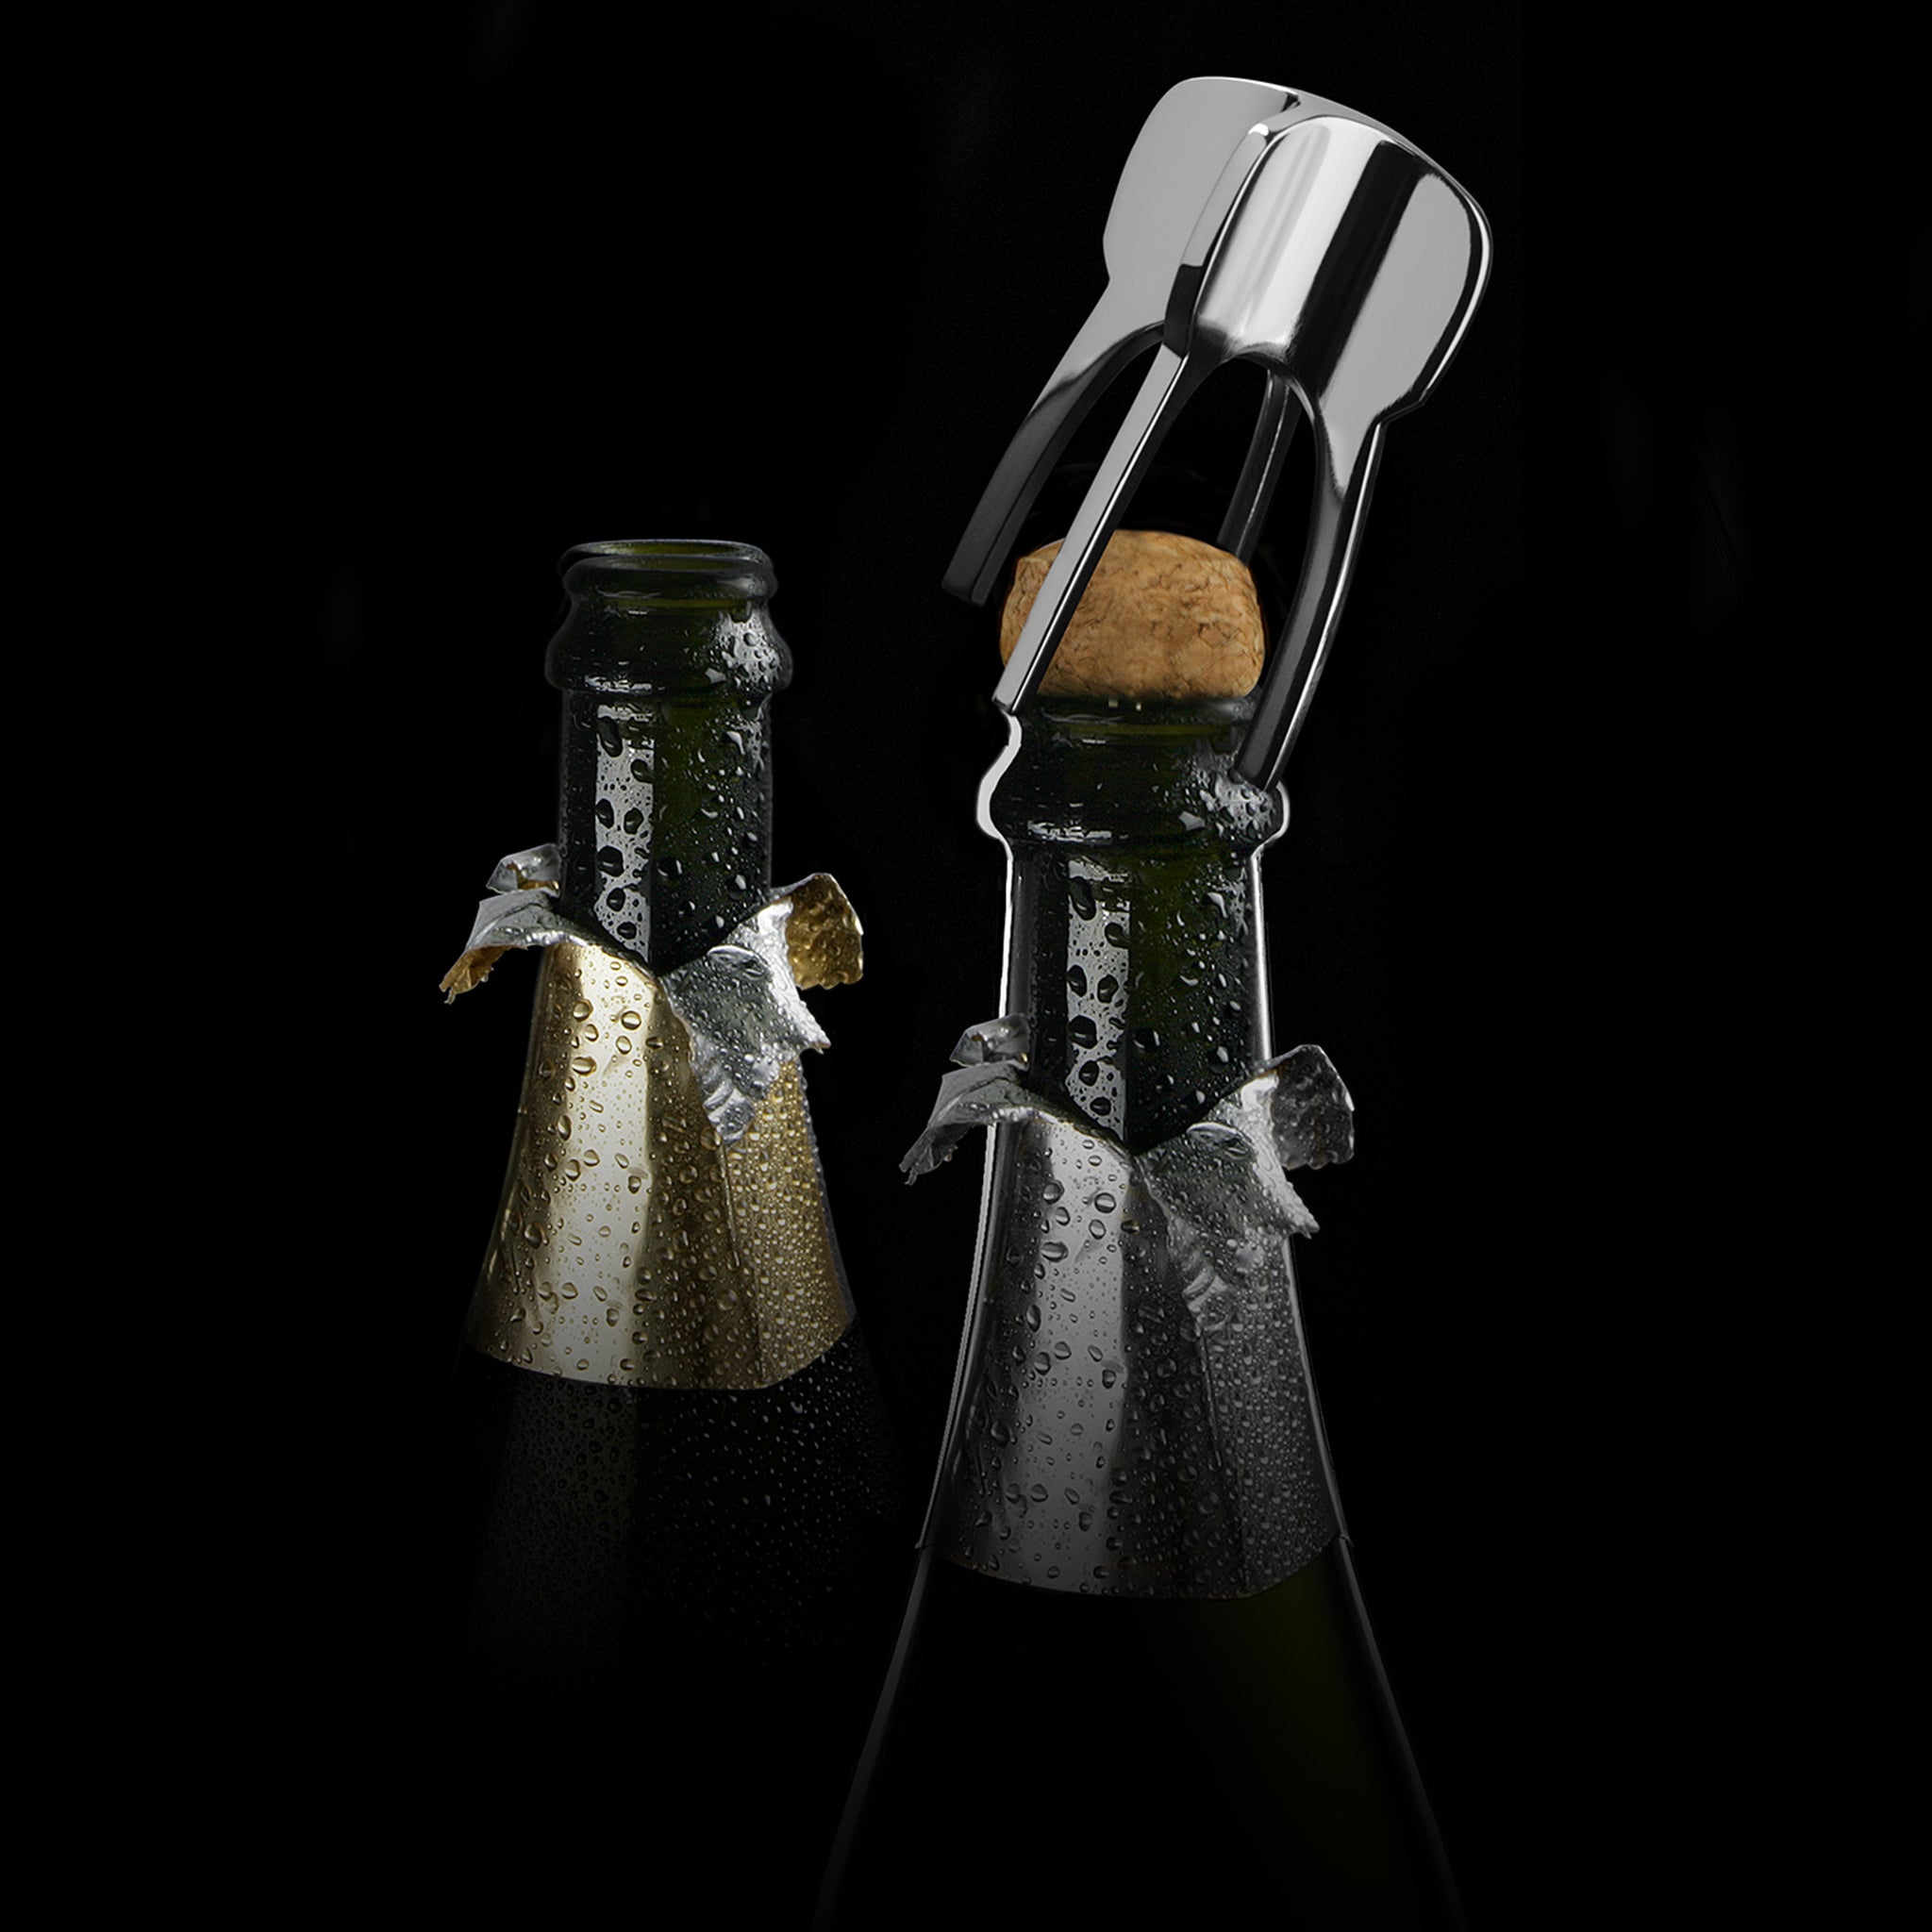  Vagnbys® Champagne Set by Ethan+Ashe Ethan+Ashe Perfumarie